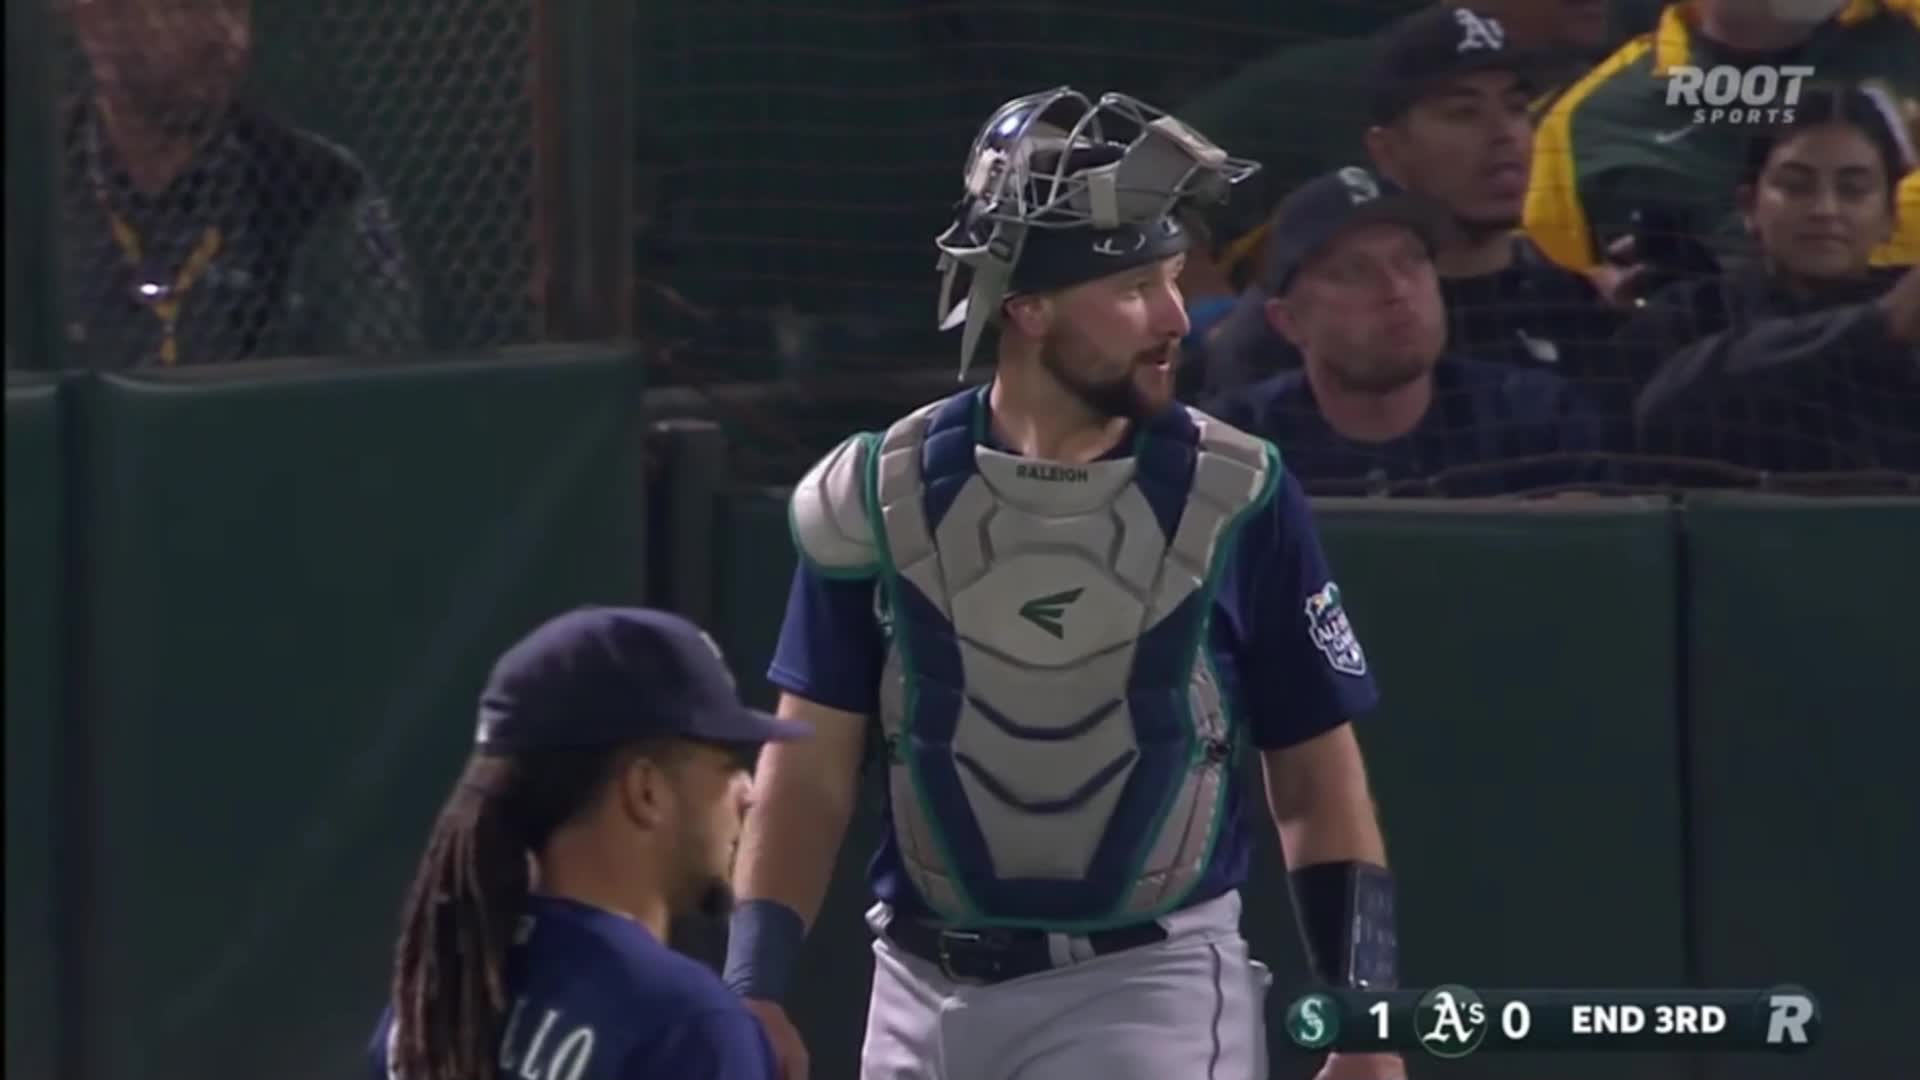 Mariners Ohtani jersey spotted at the All Star game. : r/Mariners